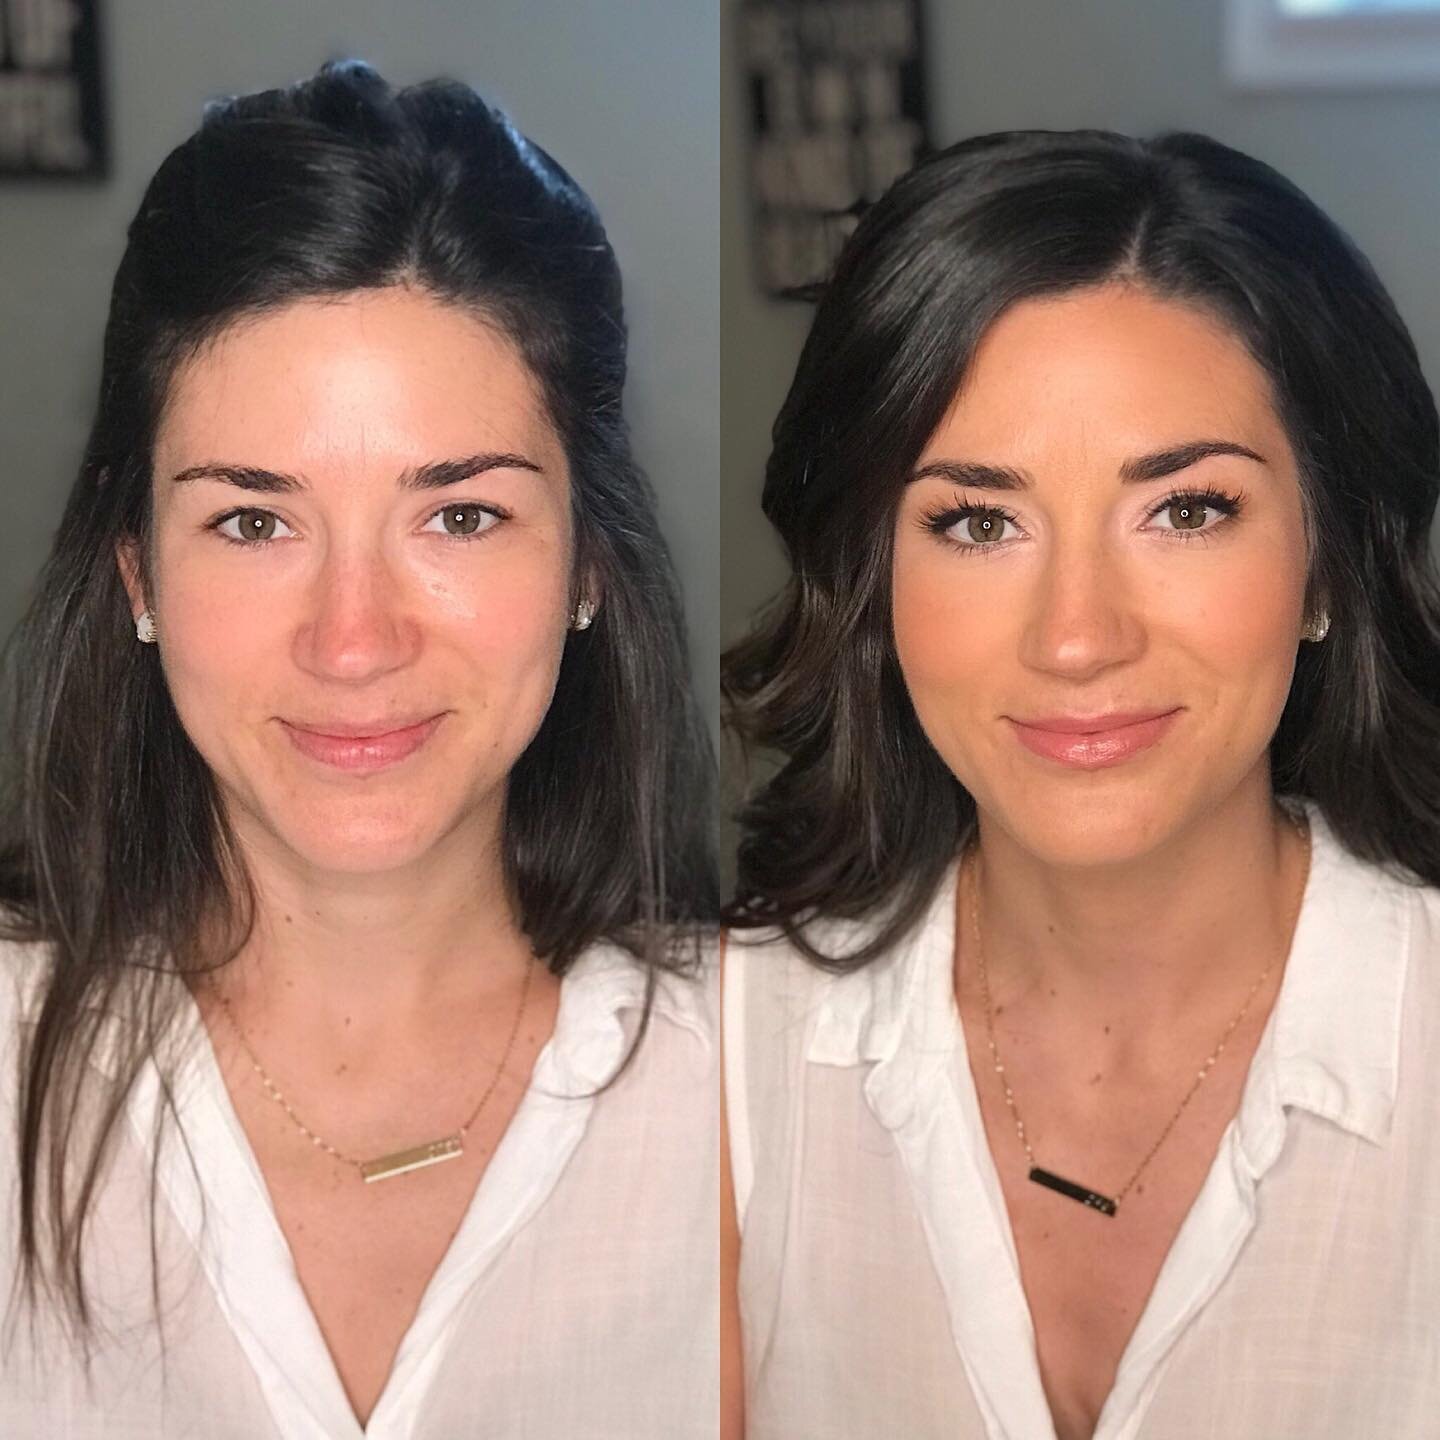 A beautiful before and after for a bride who wanted a very natural look for her wedding day.
.
.
.
#beforeandafter #wedding #weddingday #natural #naturalbeauty #beautymakeup #makeup #instamakeup #instabeauty #instadaily #bride #prettyme #prettymemake